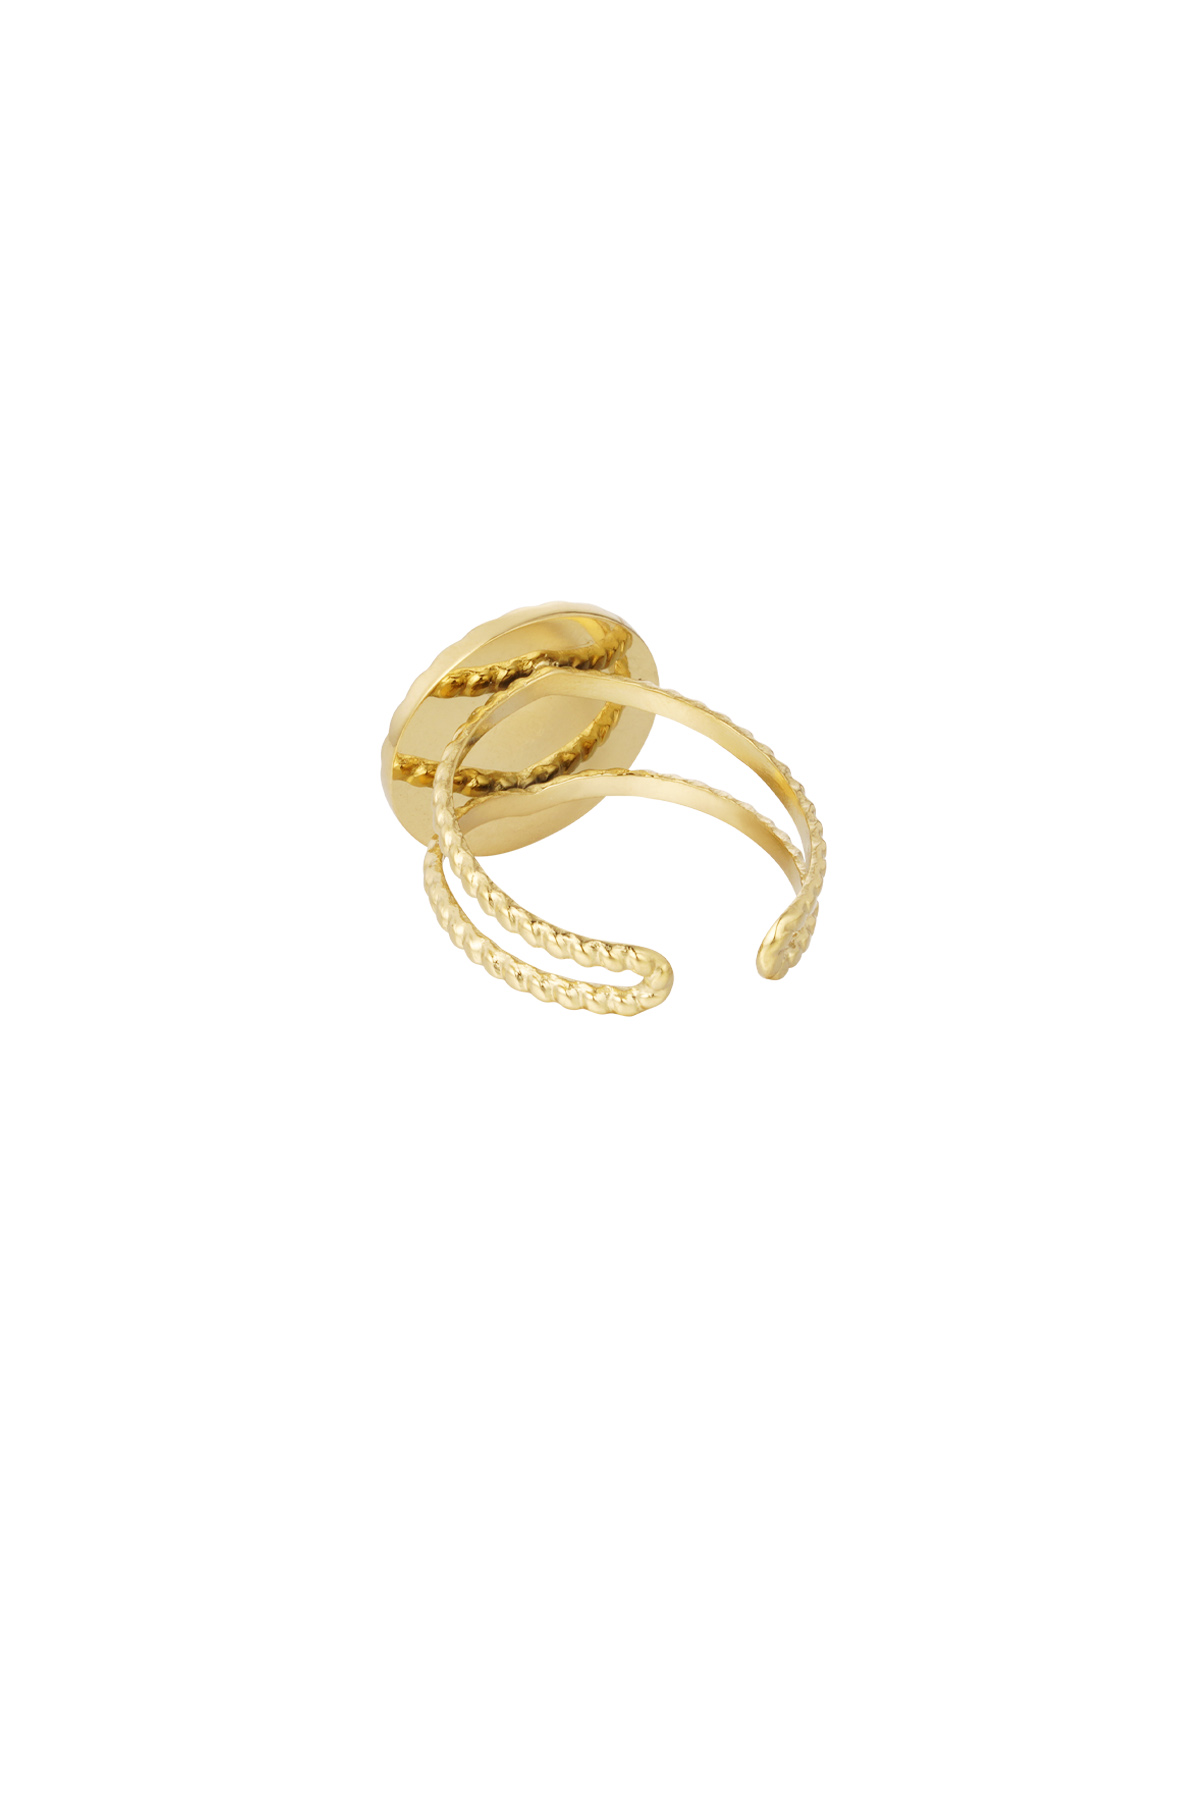 Ring round stone - gold/beige h5 Picture5